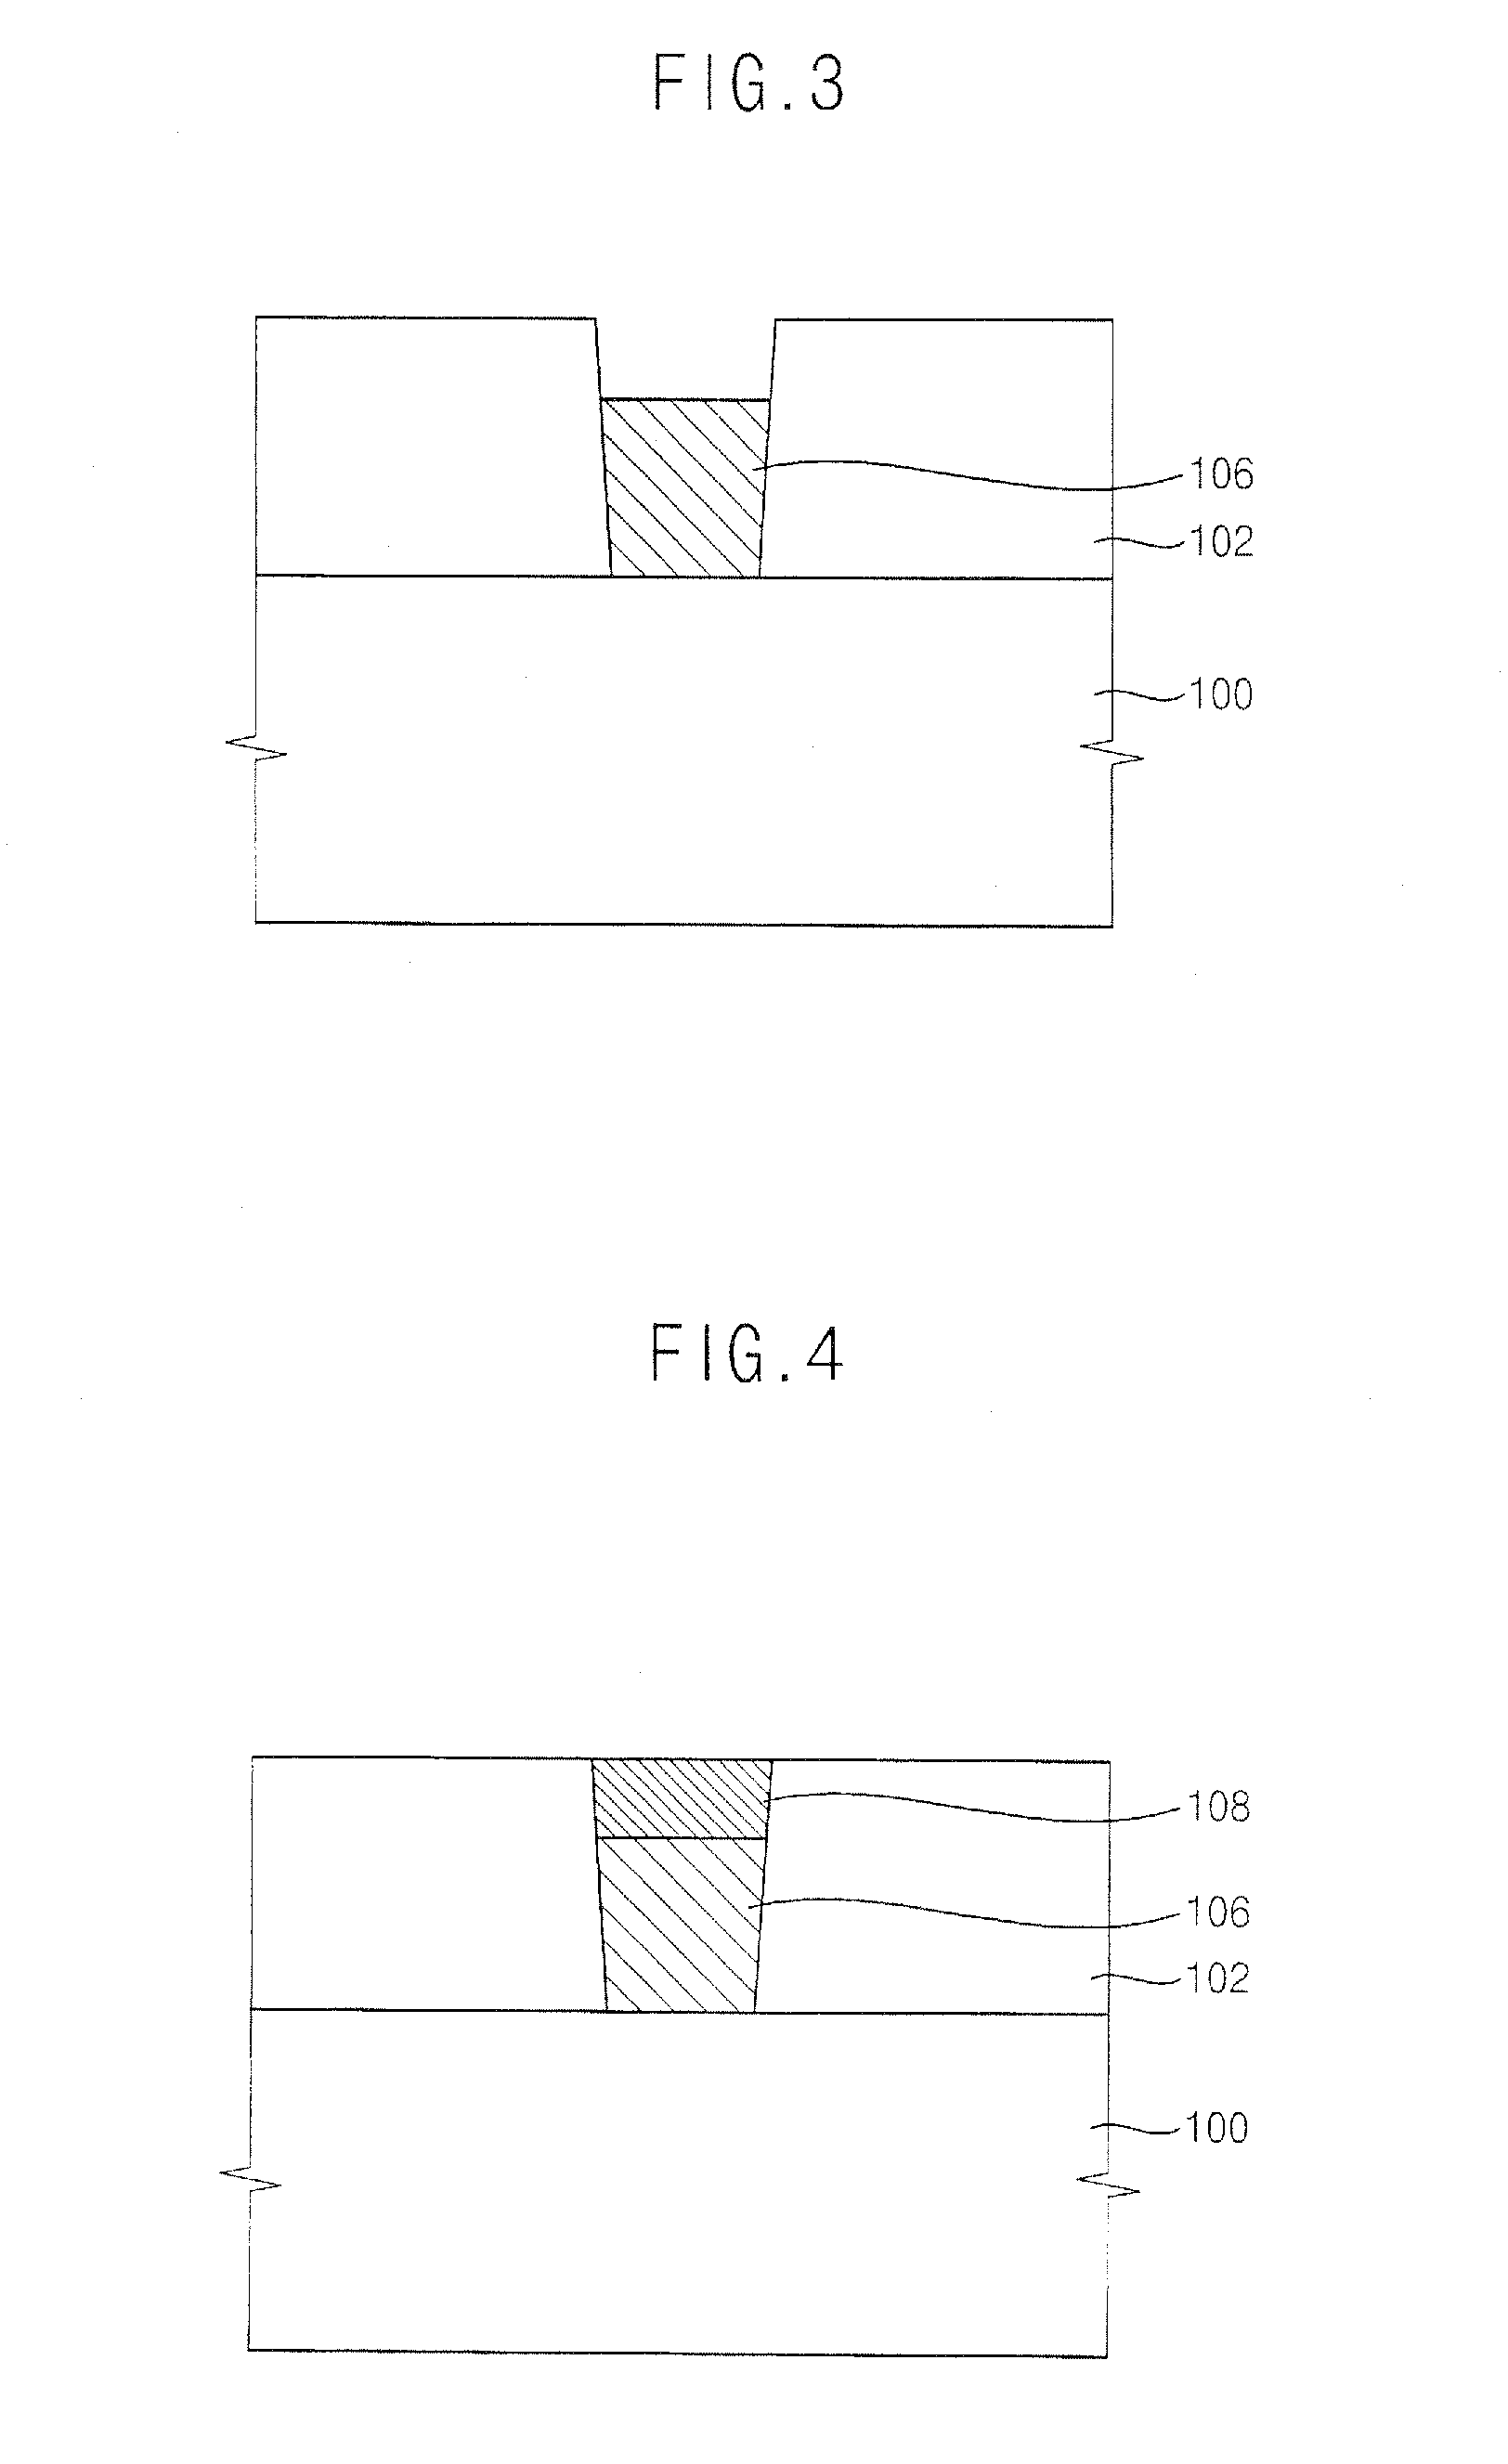 Wiring structure in a semiconductor device, method of forming the wiring structure, semiconductor device including the wiring structure and method of manufacturing the semiconductor device